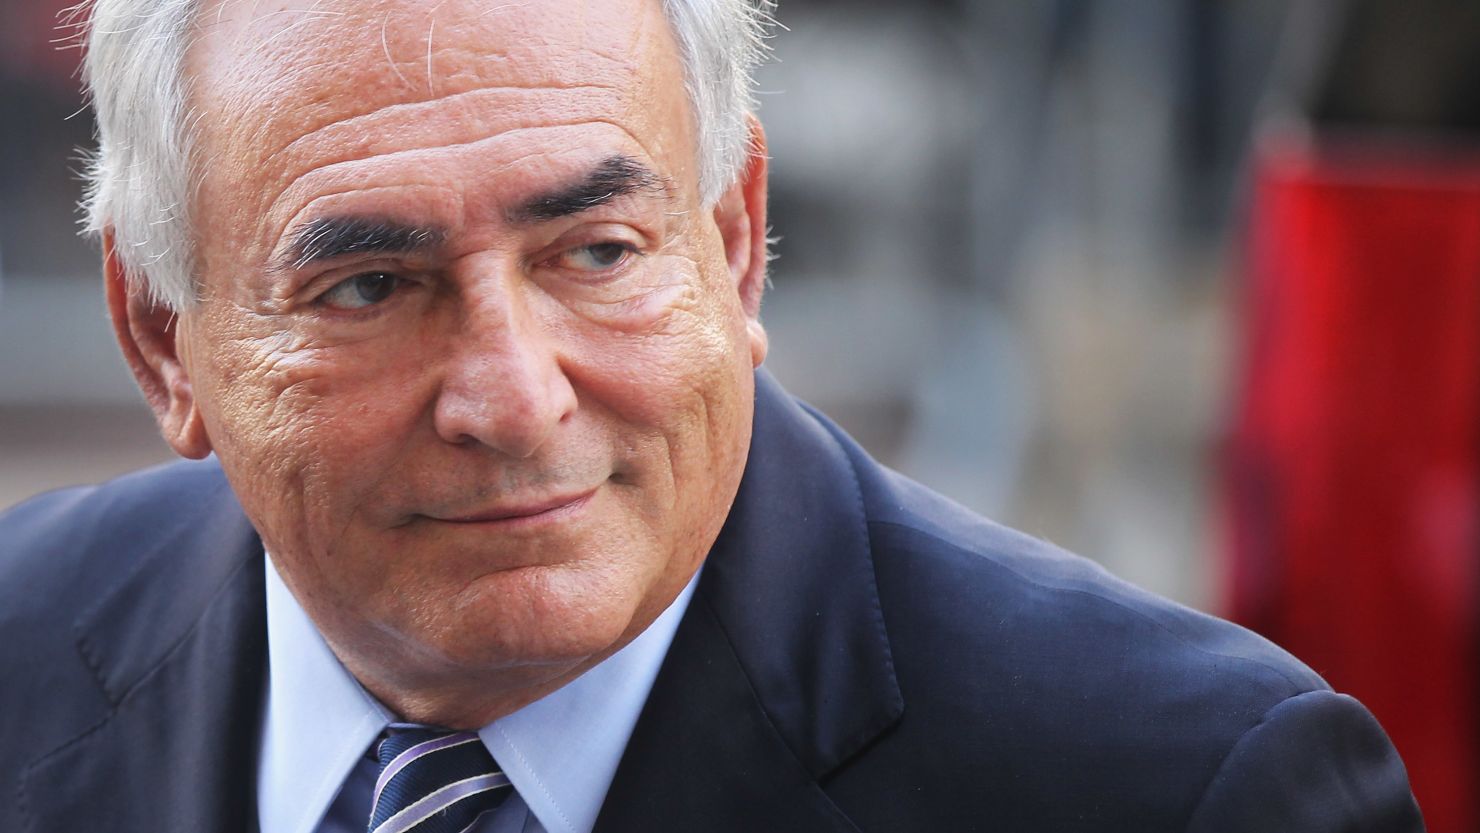 Ex-IMF head Dominique Strauss-Kahn wants to dismiss a civil suit brought by a hotel maid, claiming he has diplomatic immunity.